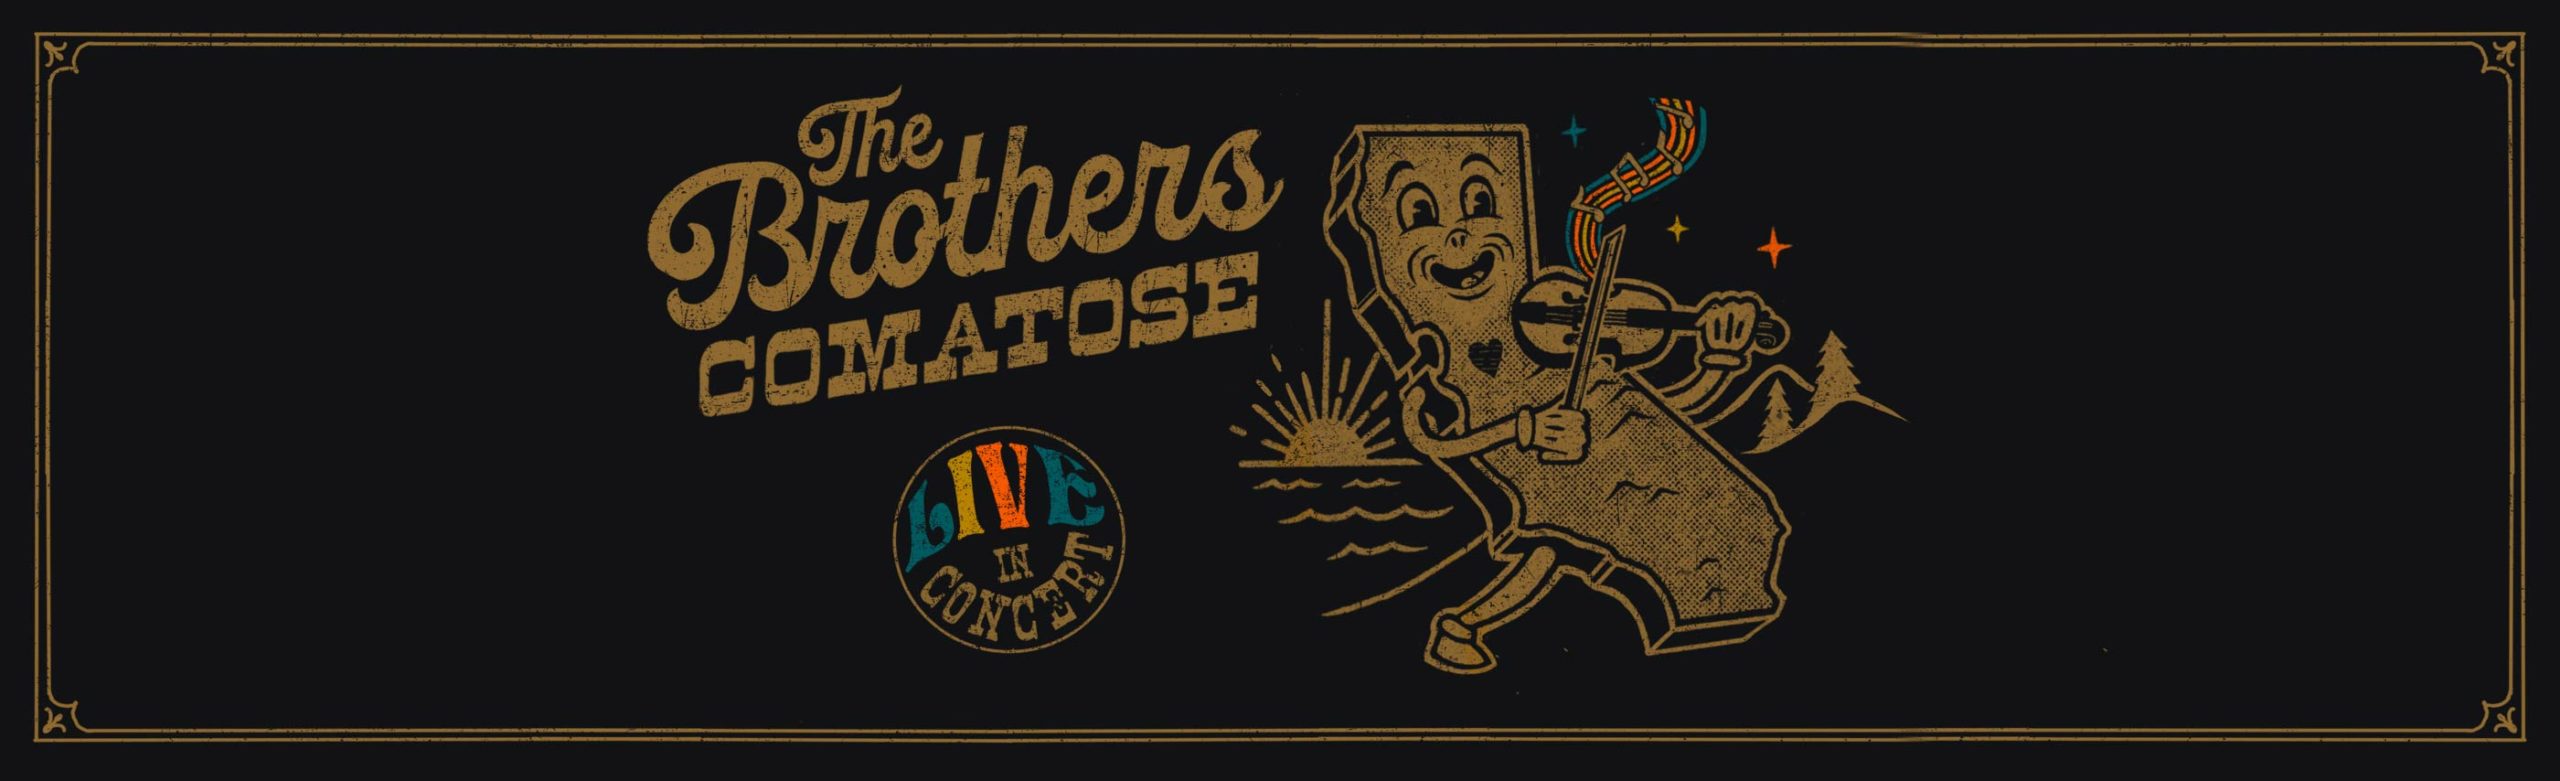 Brothers Comatose Tickets + Tour T-Shirt  AND An Autographed Vinyl EP of “Ink” Giveaway Image